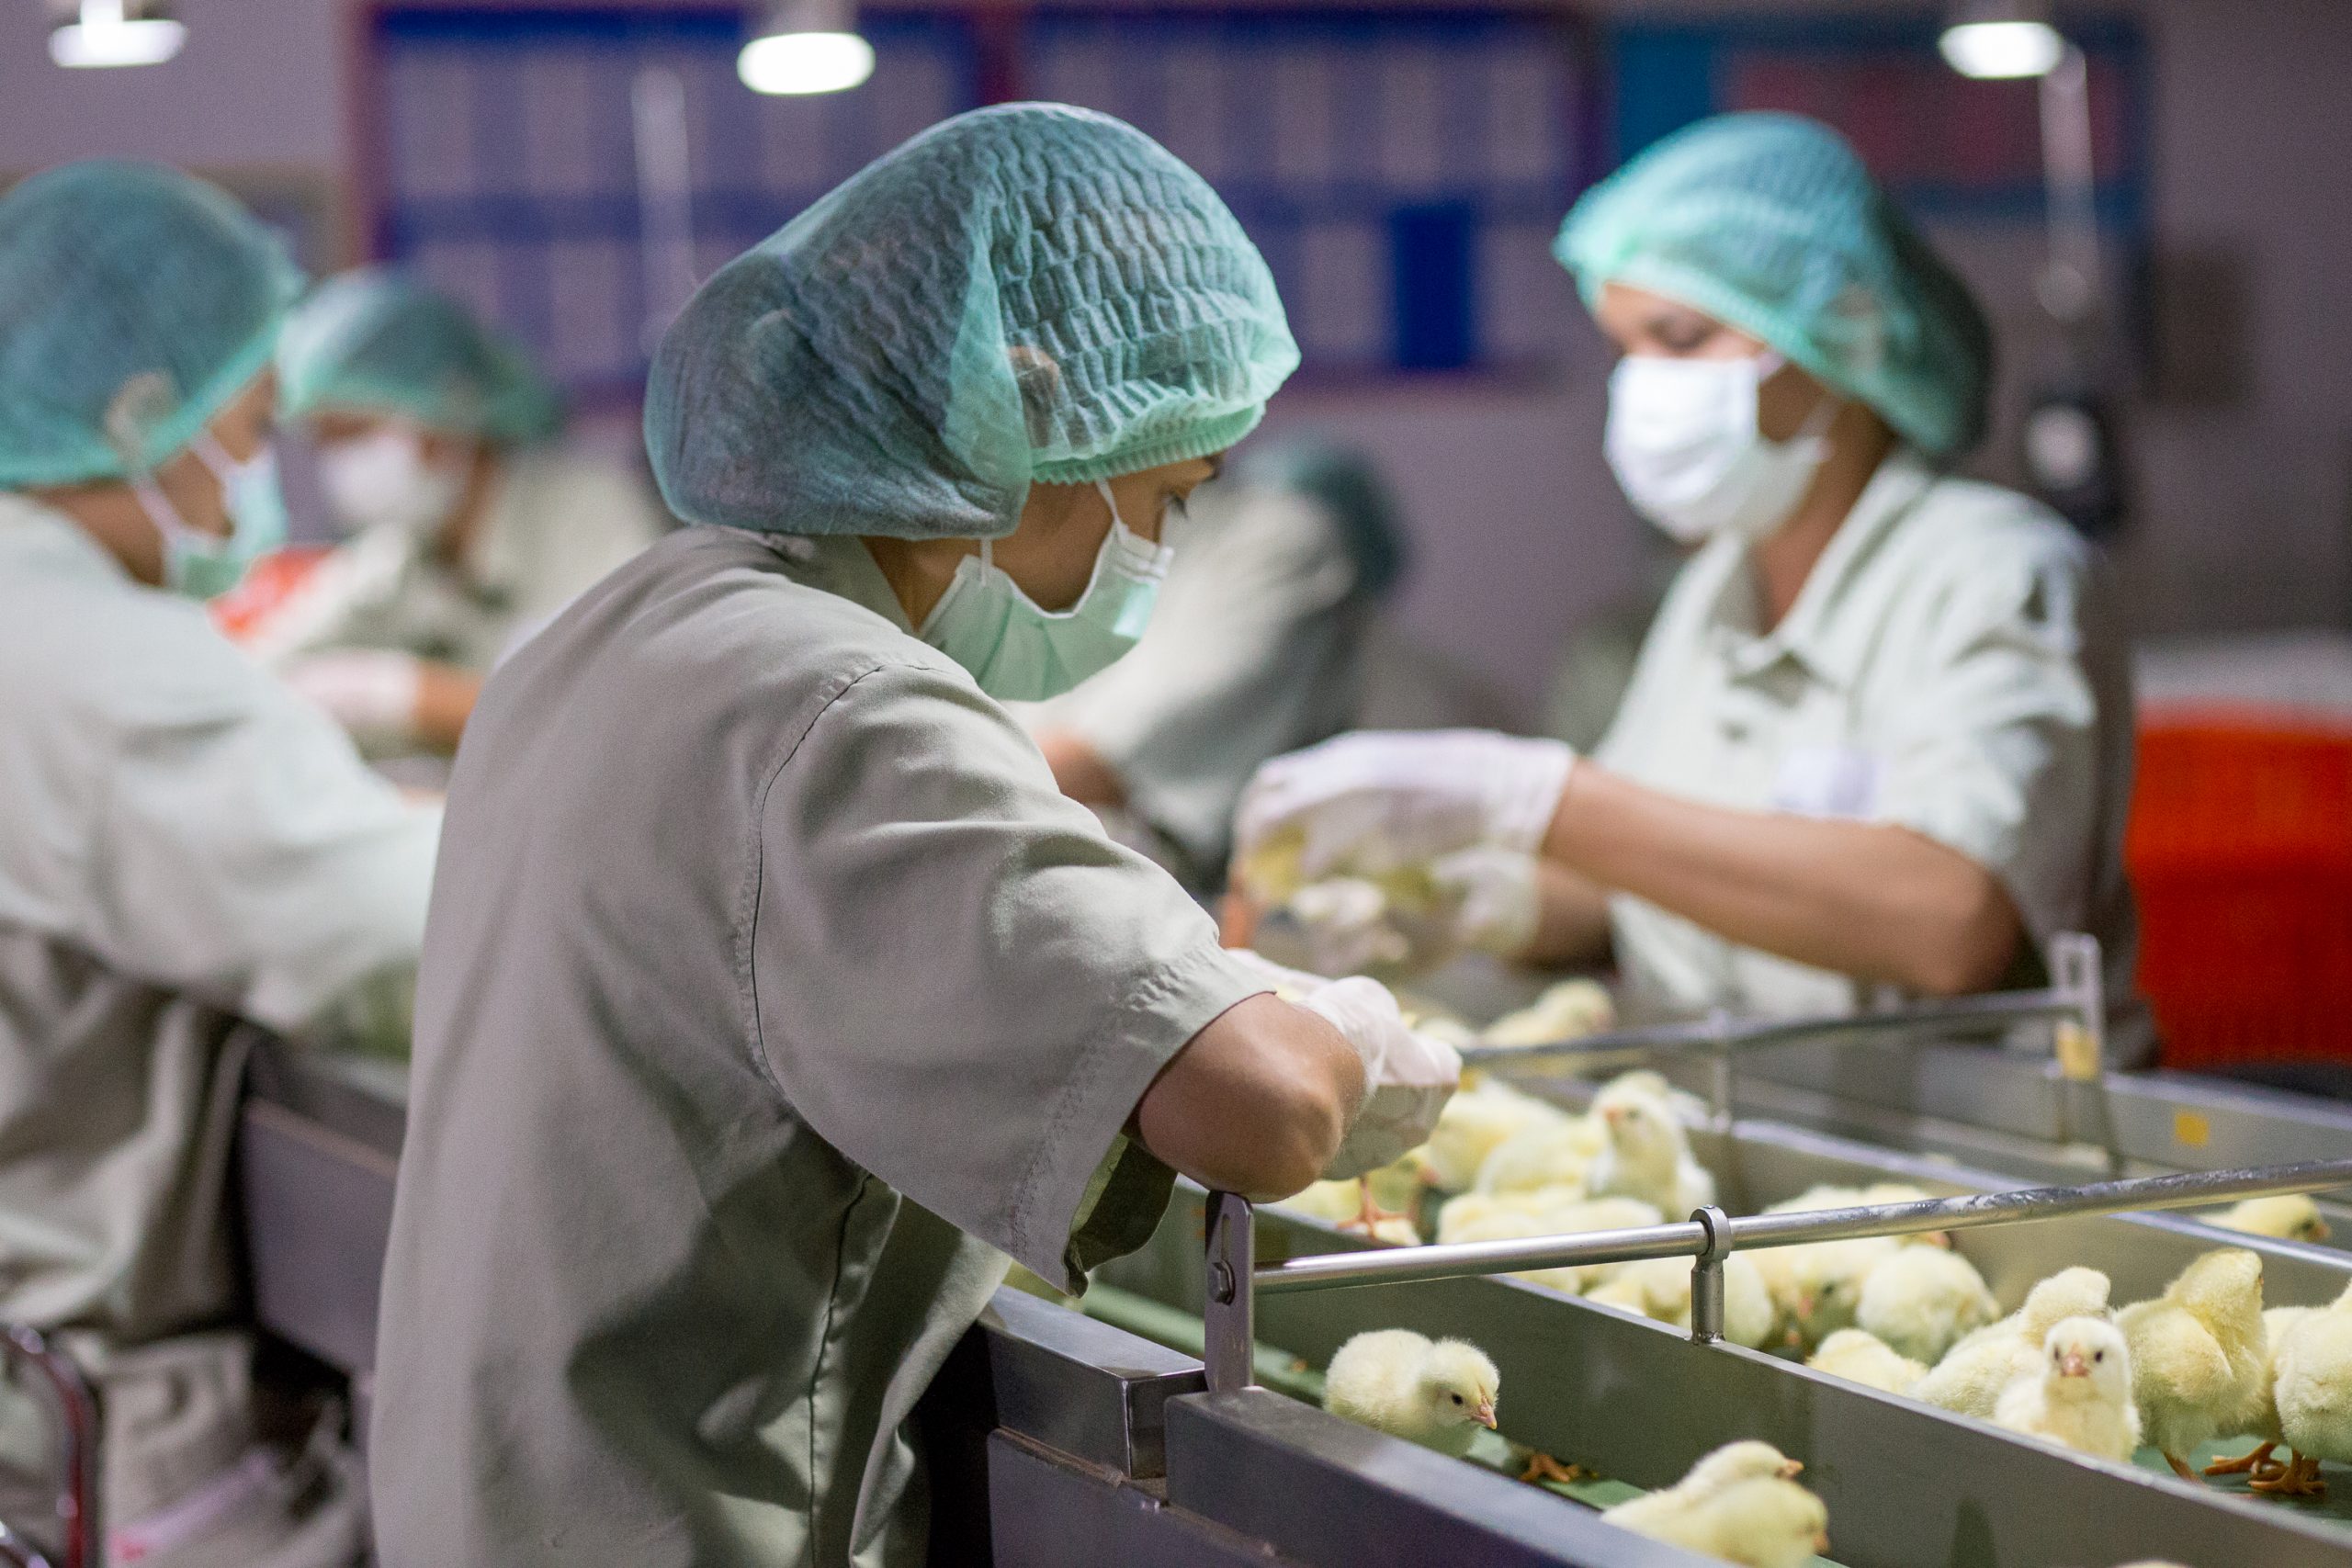 Poultry workers processing chicken gender; Photo credit: C.Lotongkum / Shutterstock